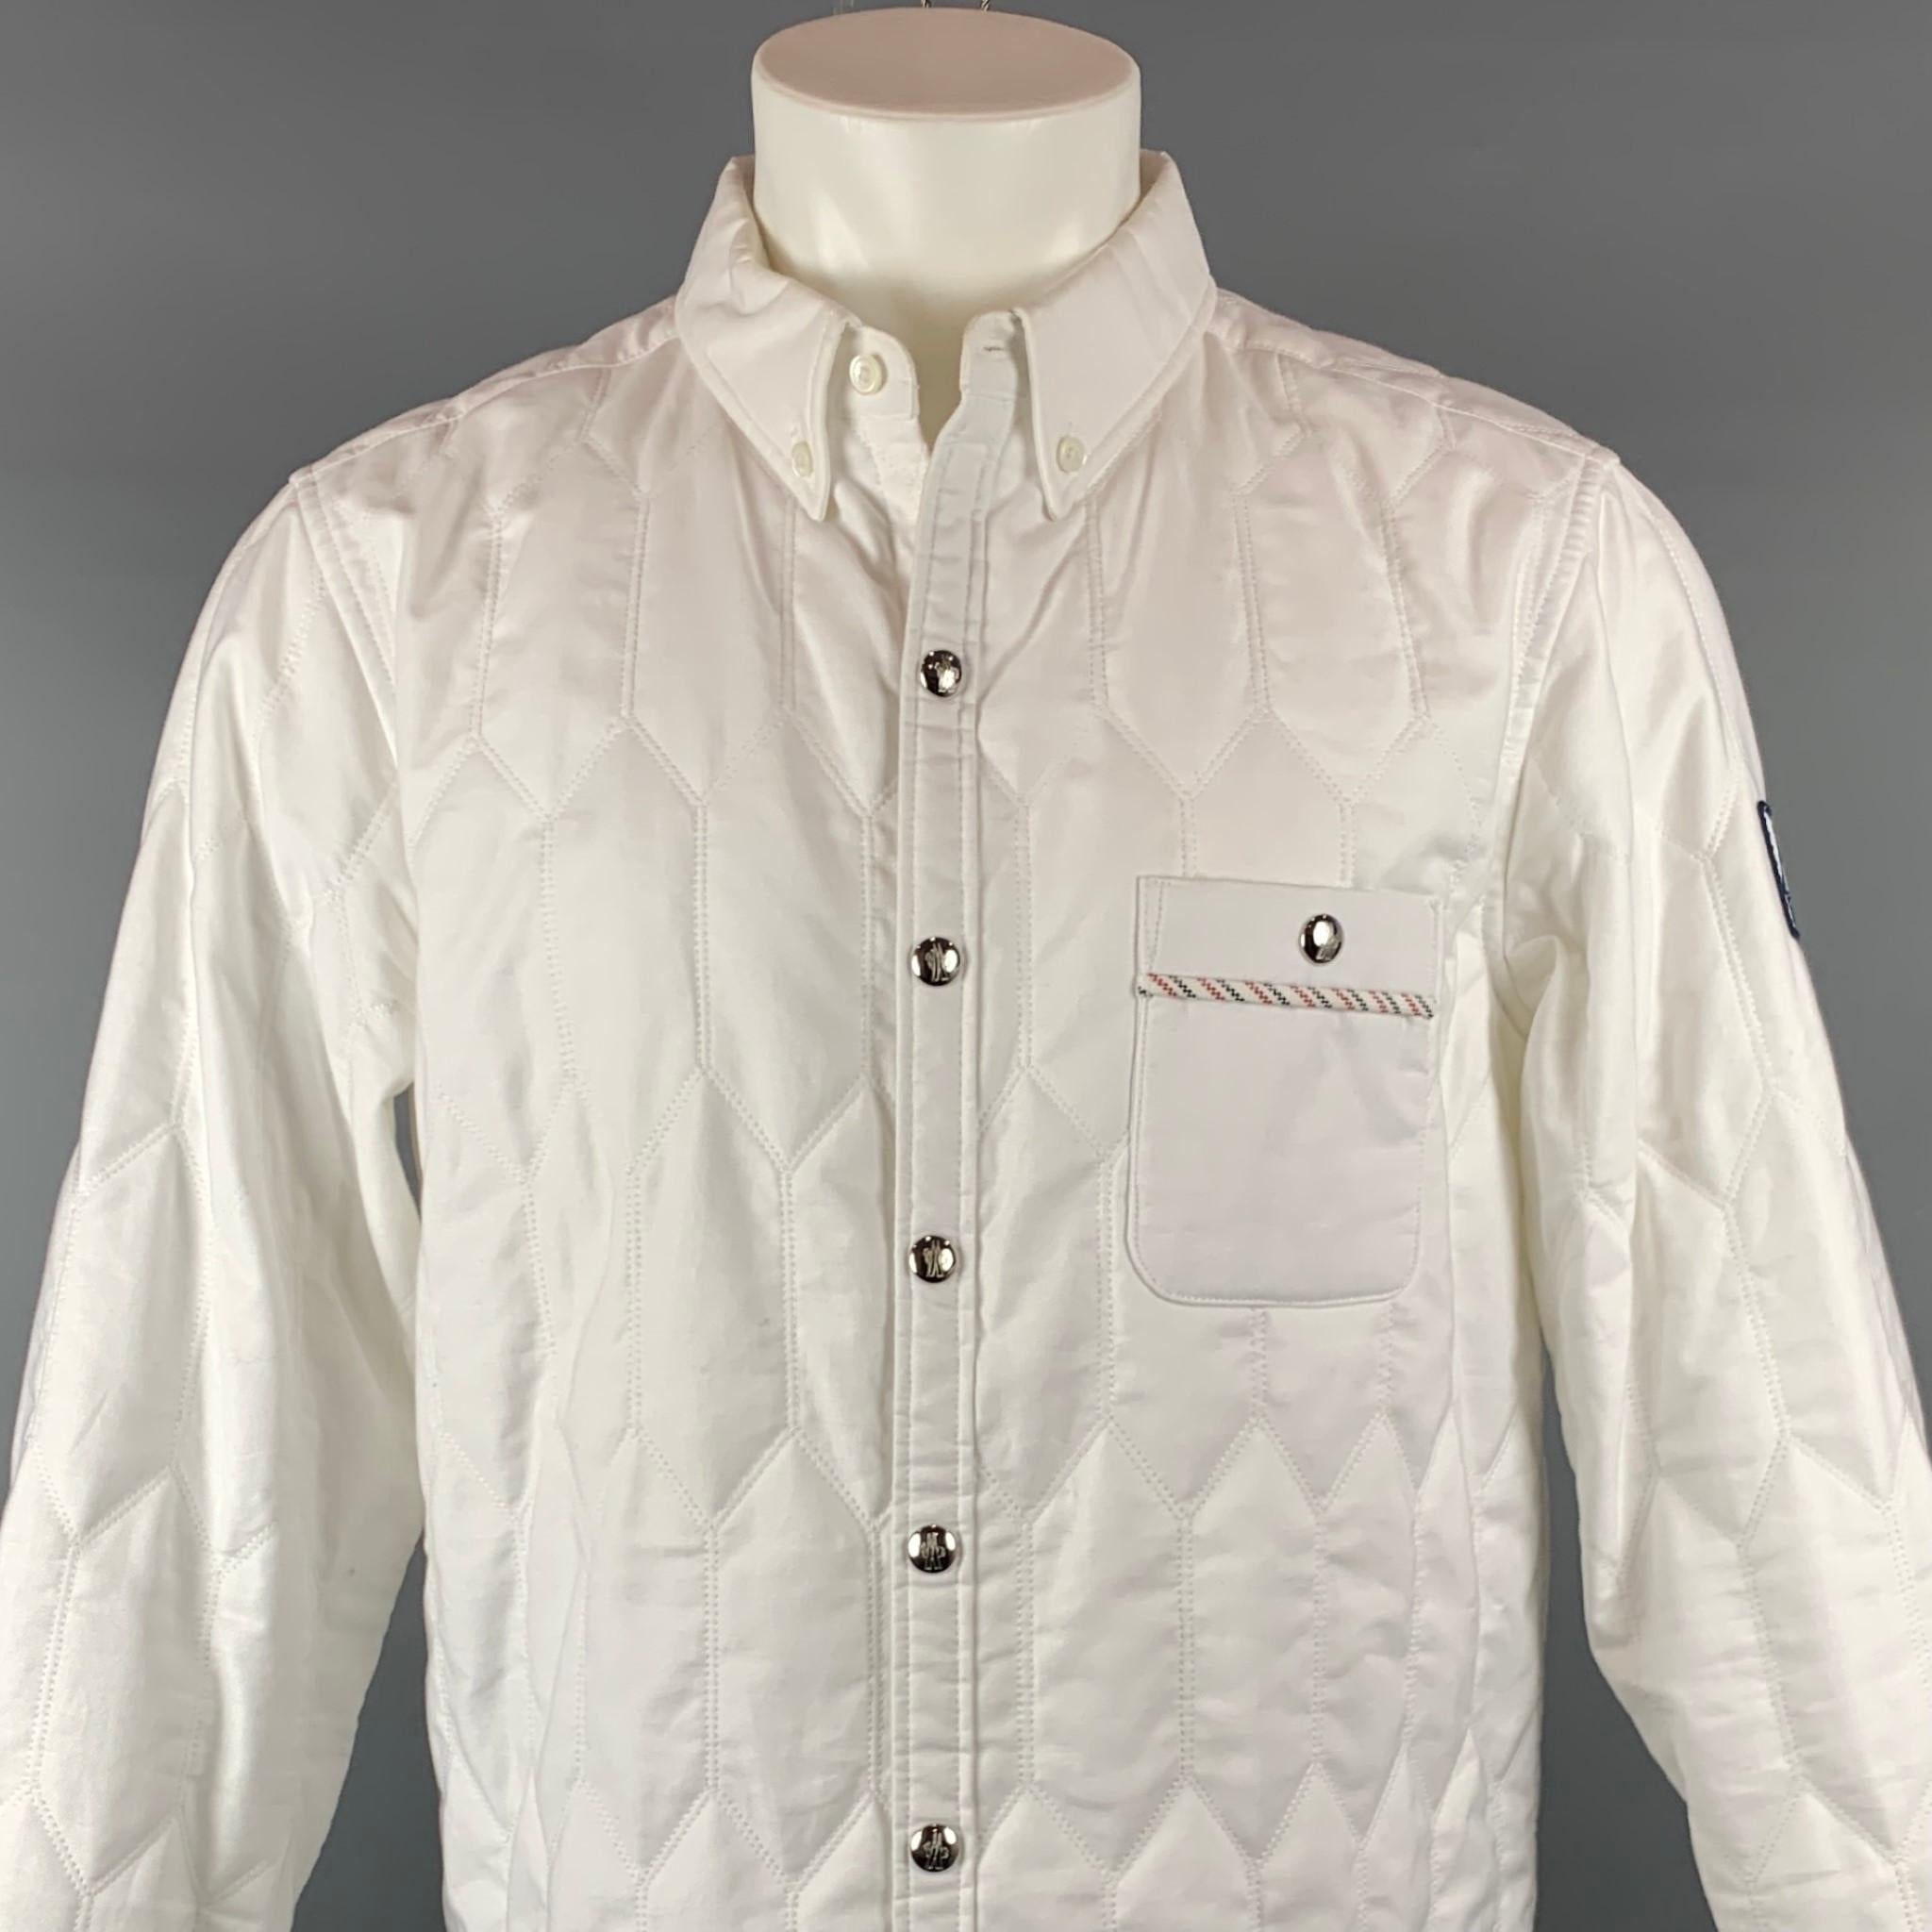 MONCLER GAMME BLEU long sleeve shirt comes in a white quilted cotton featuring a button down collar, sleeve logo detail, striped trim, front pocket, and a snap button closure. Made in Italy.

Very Good Pre-Owned Condition.
Marked: